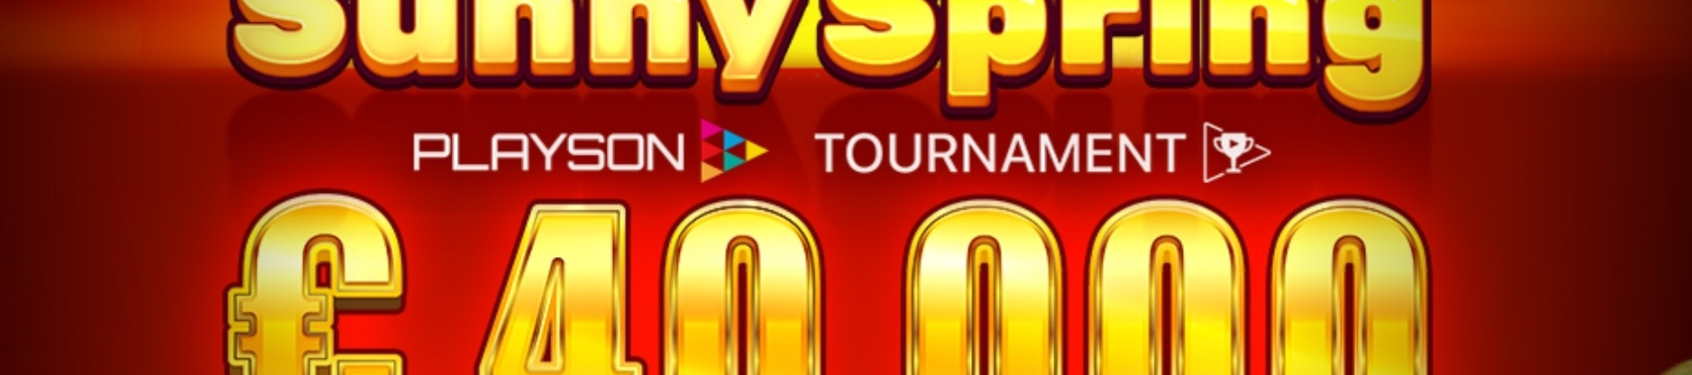 Sunny Spring €40K slots tournament by Playson